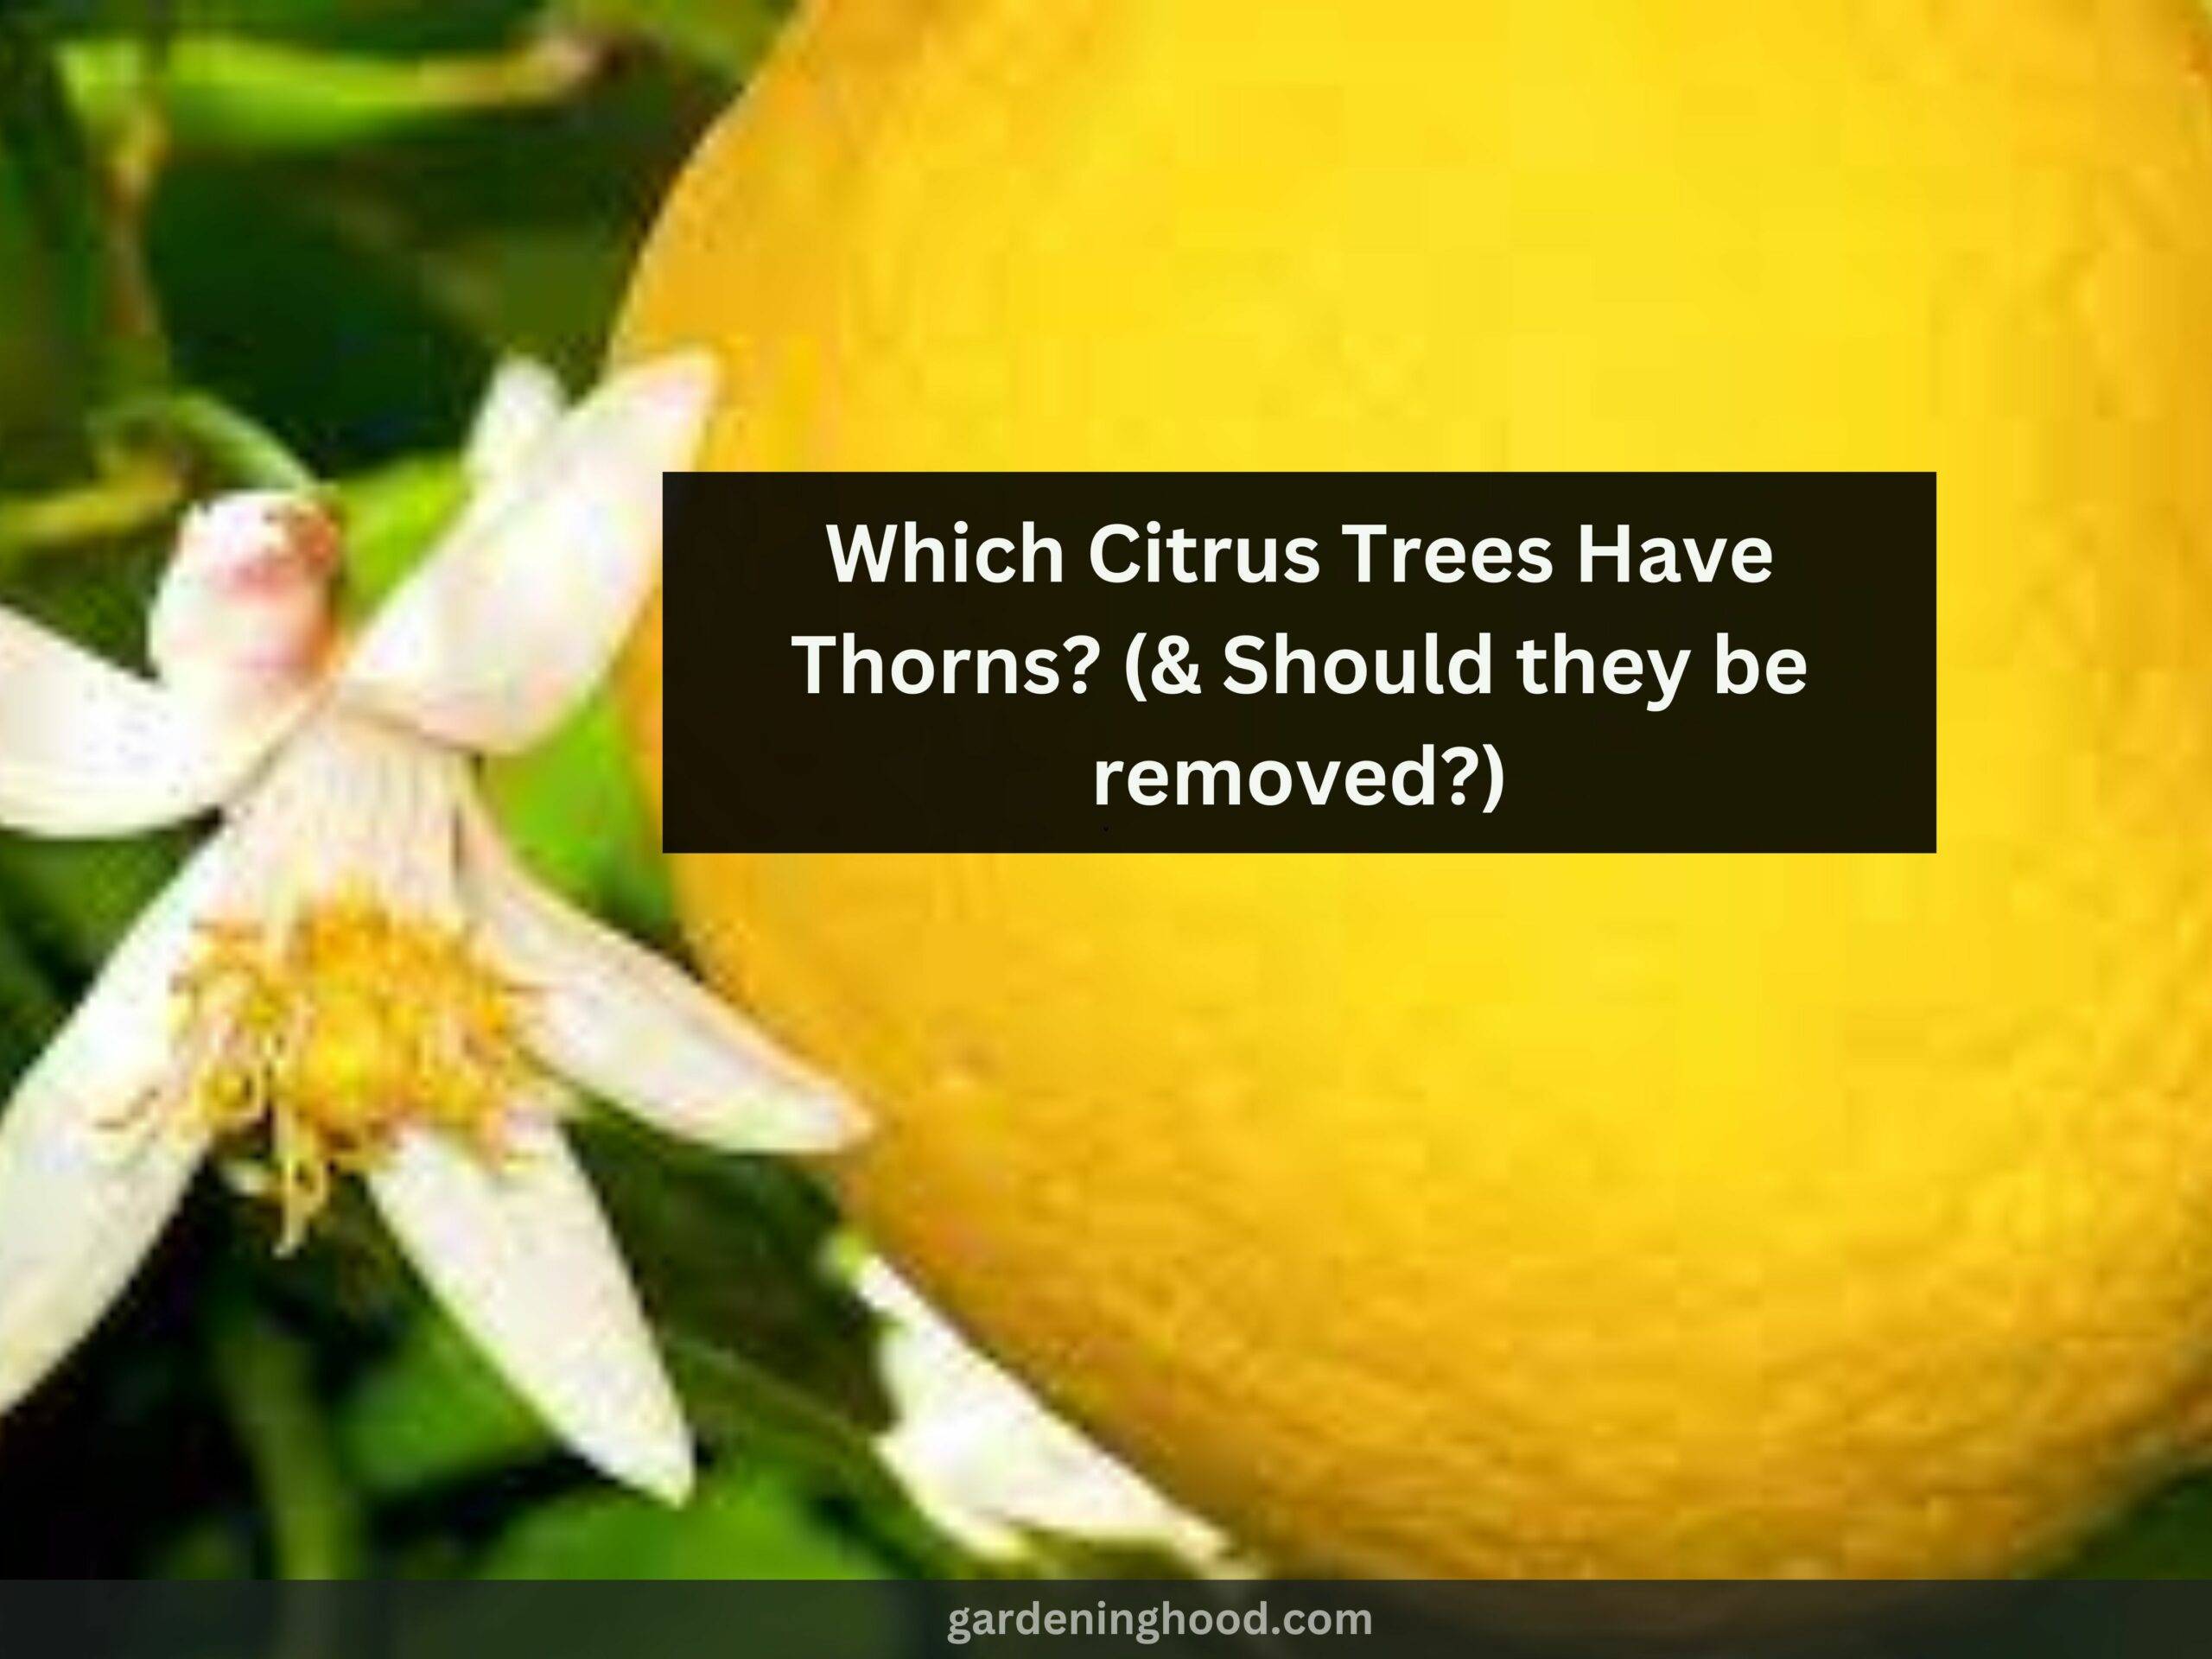 Which Citrus Trees Have Thorns? (& Should they be removed?)